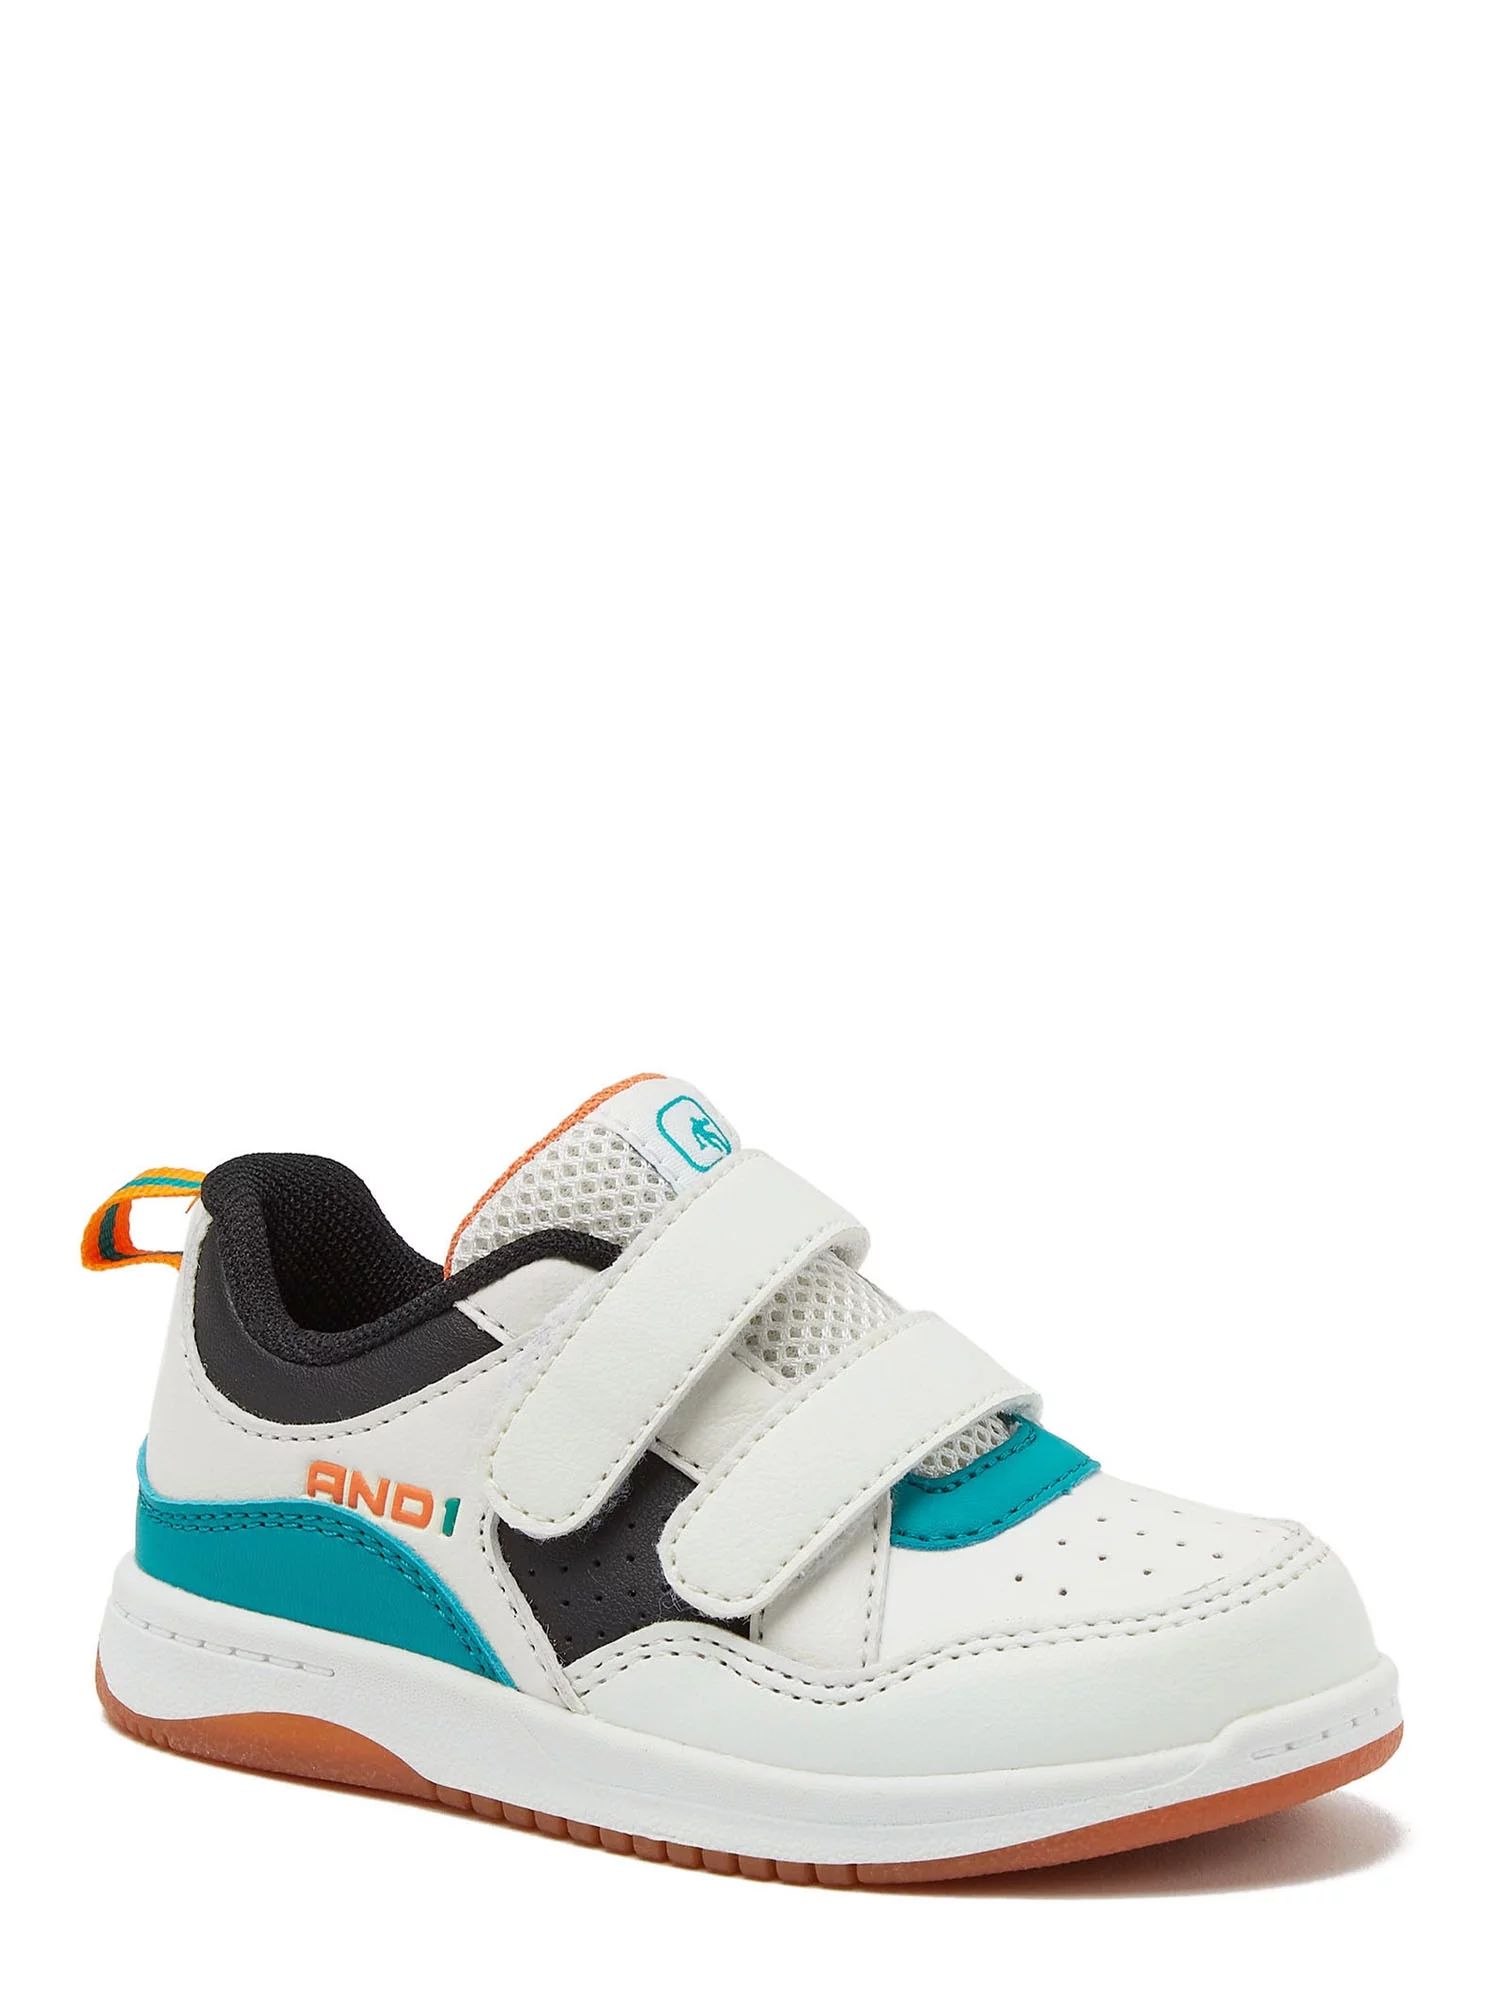 AND1 Toddler Boys Court Low Basketball Sneakers, Sizes 7-12 | Walmart (US)